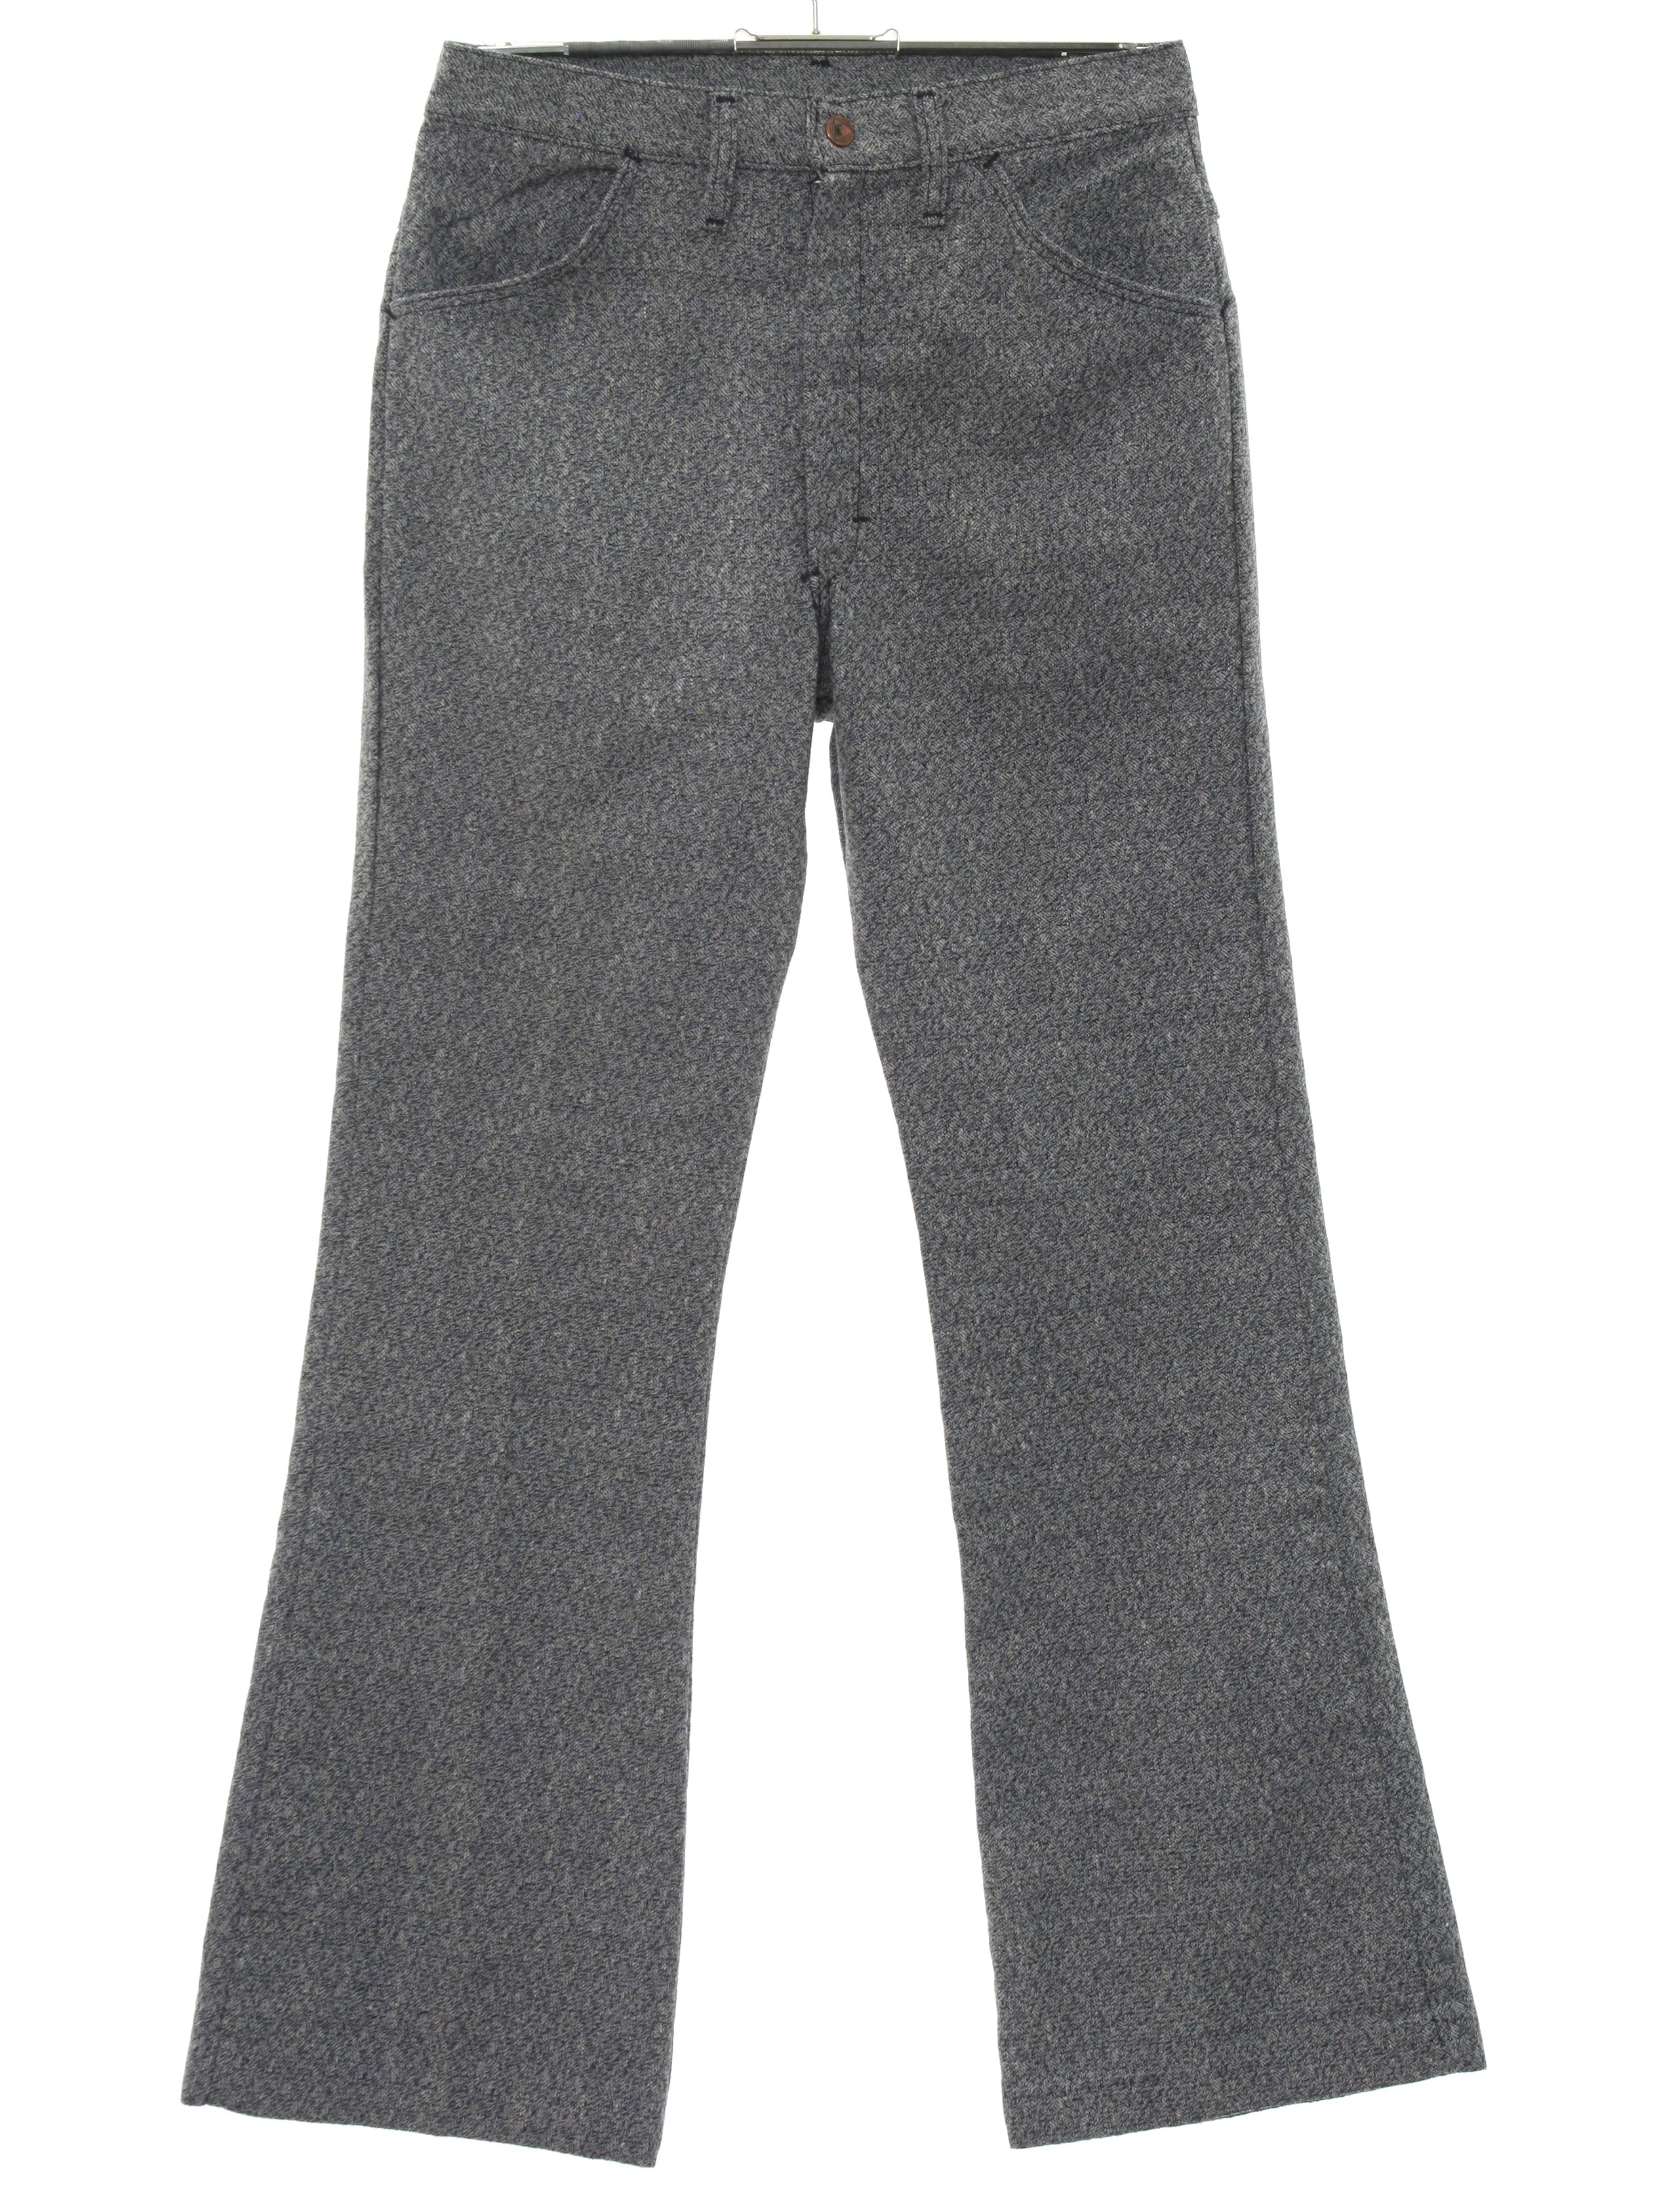 Retro 1960's Flared Pants / Flares (Missing Label) : 60s -Missing Label ...